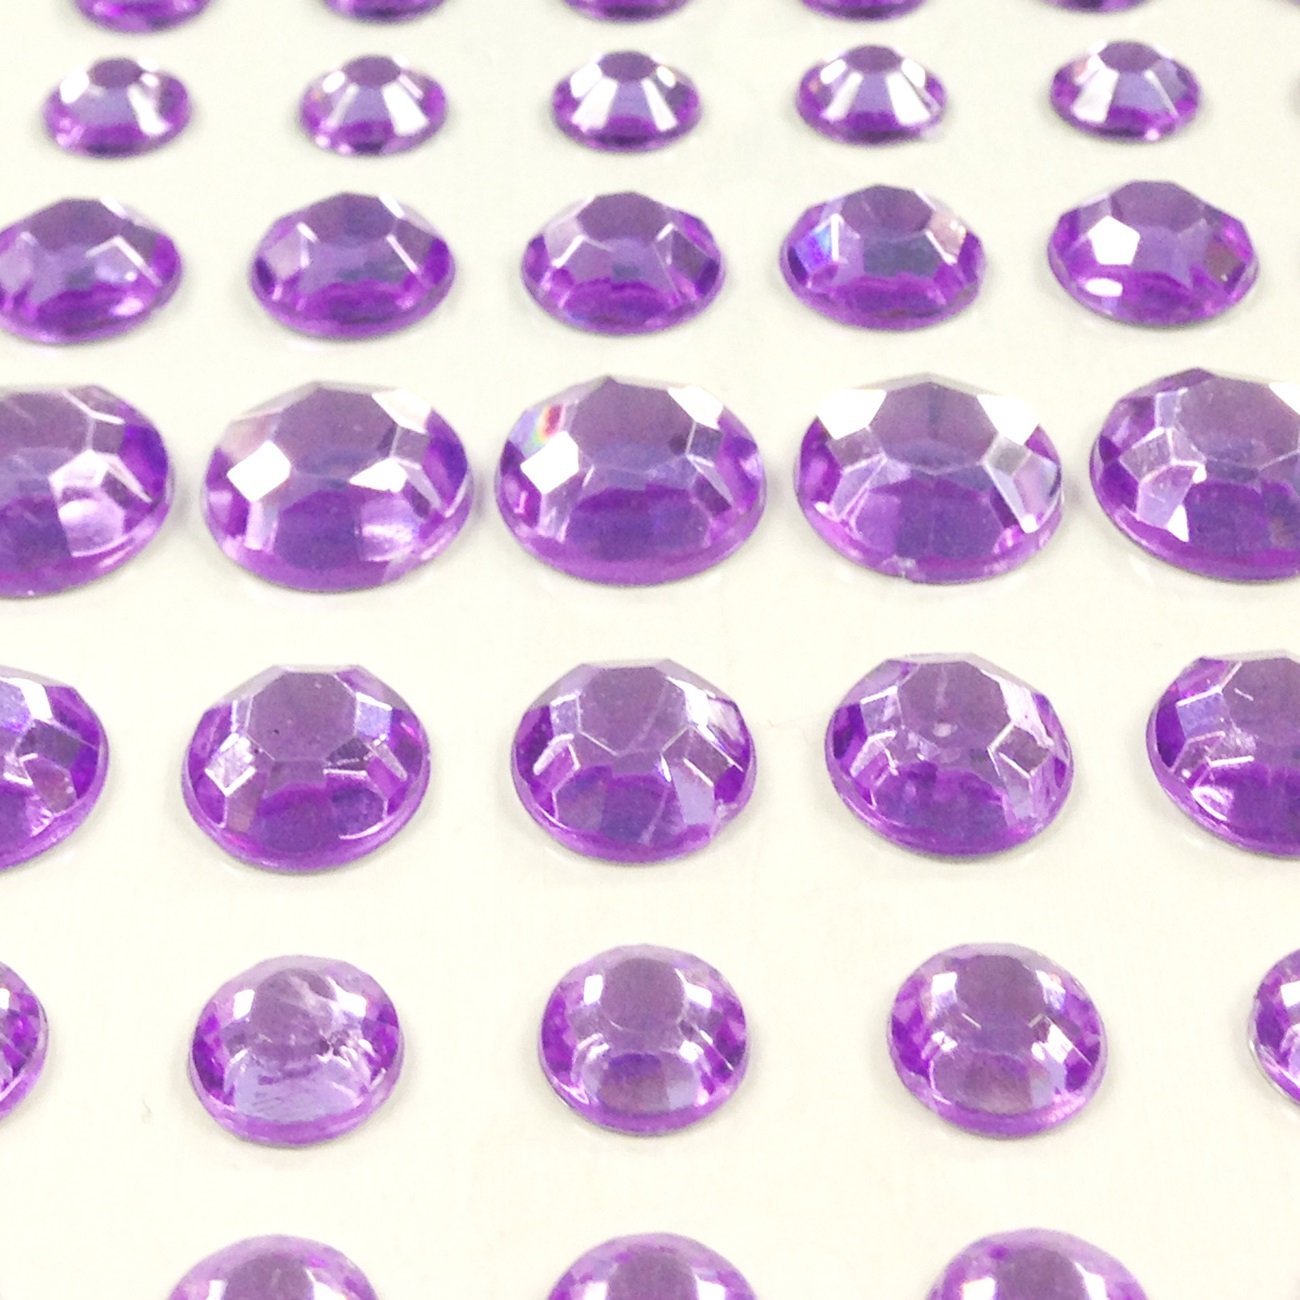 Wrapables 6mm Pearl Adhesive Gem Stickers 6mm Pearl Stickers, 540pcs